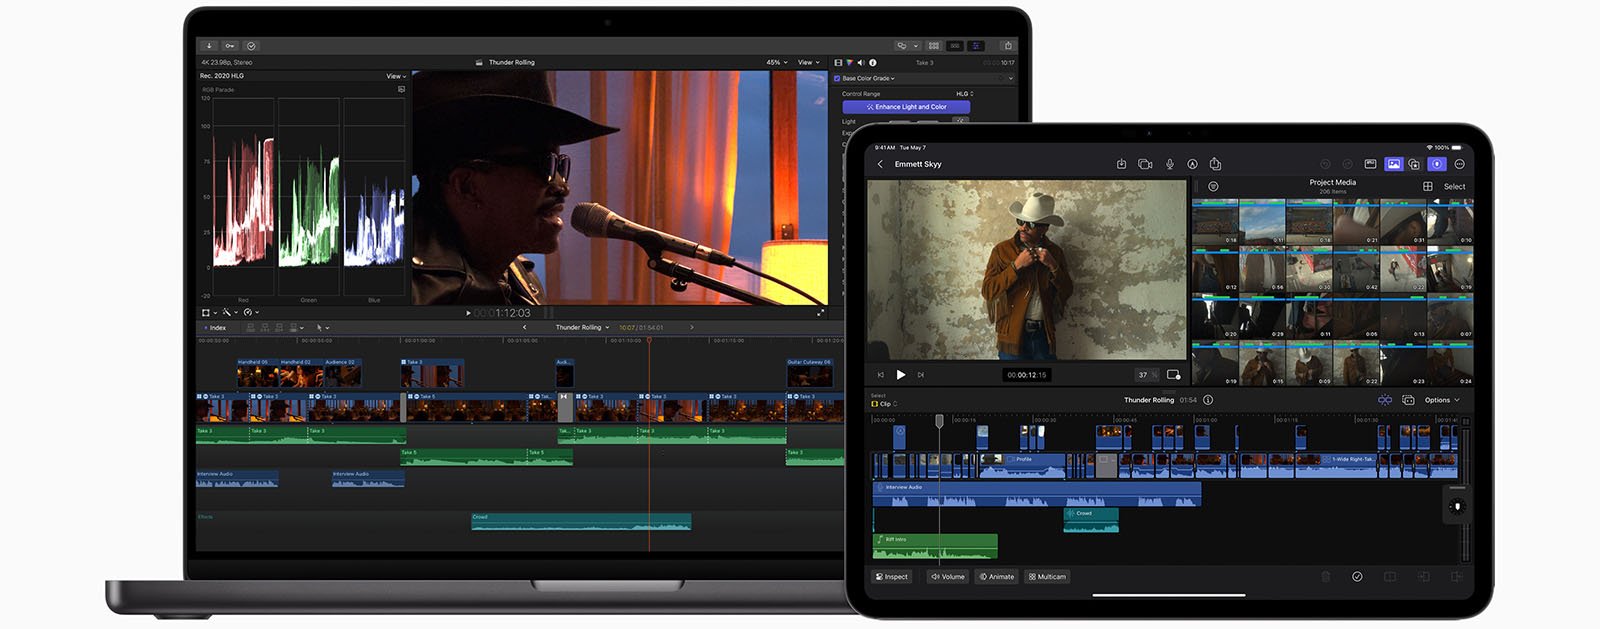 Two devices displaying video editing software with timelines and clips: a laptop editing a film scene with an officer, and a tablet showing a wild west themed video.